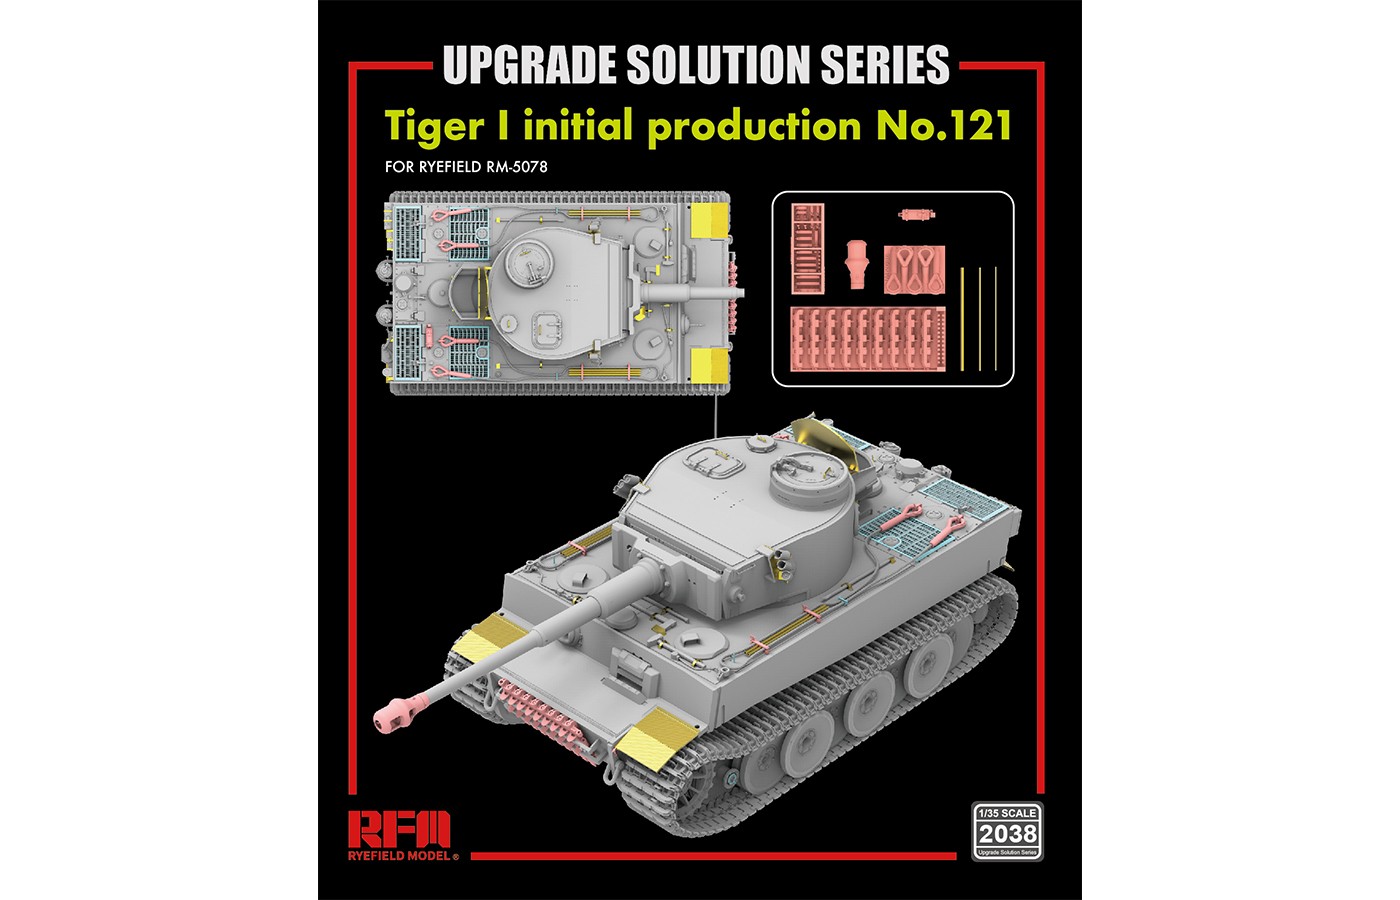 RM-2038 TIGER I 121# initial production UPGRADE SOLUTION SERIES